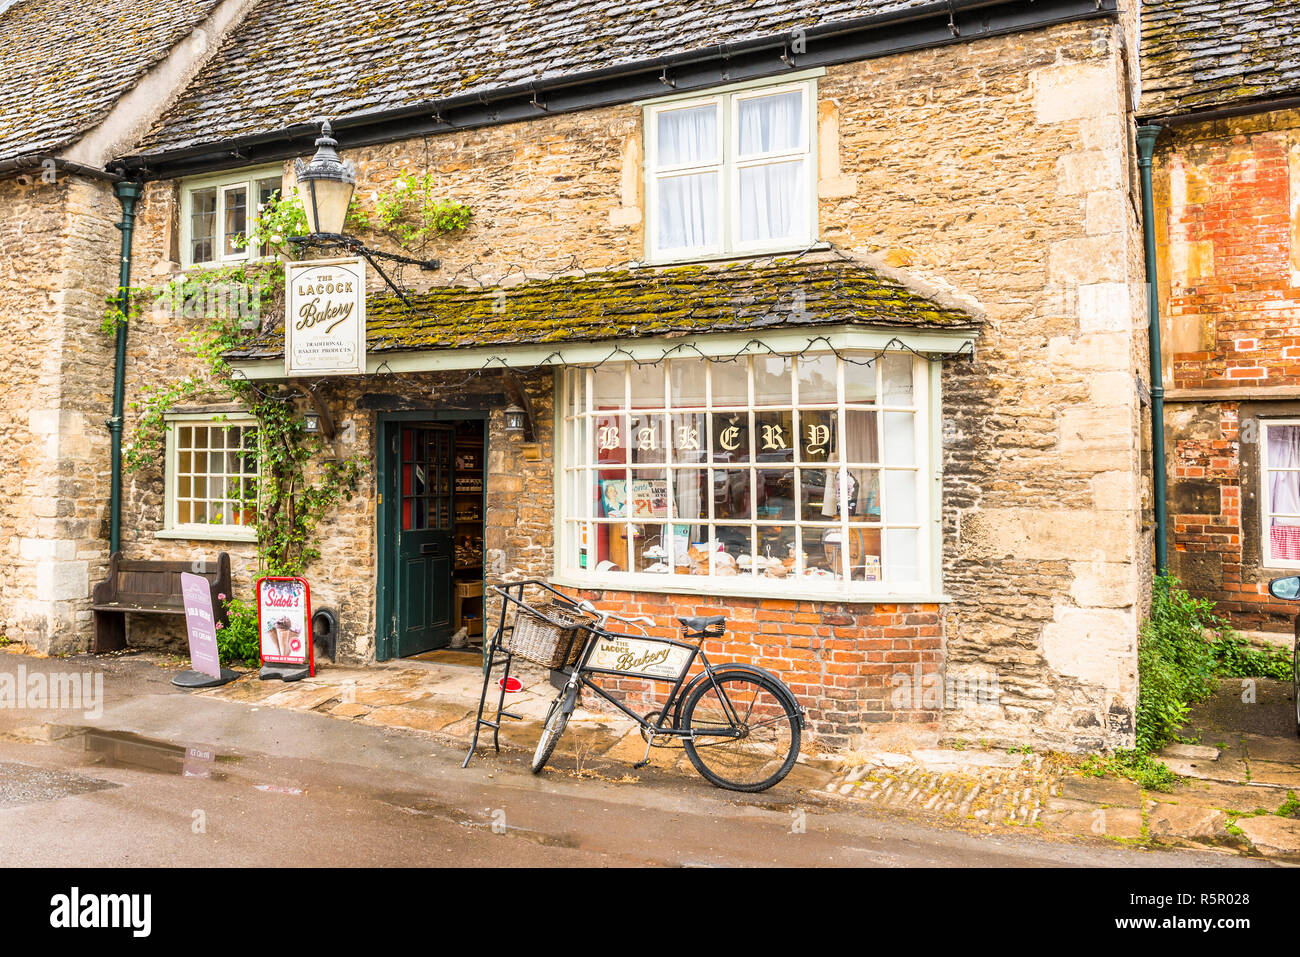 The Lacock Bakery in Lacock Village, Wiltshire. Stock Photo